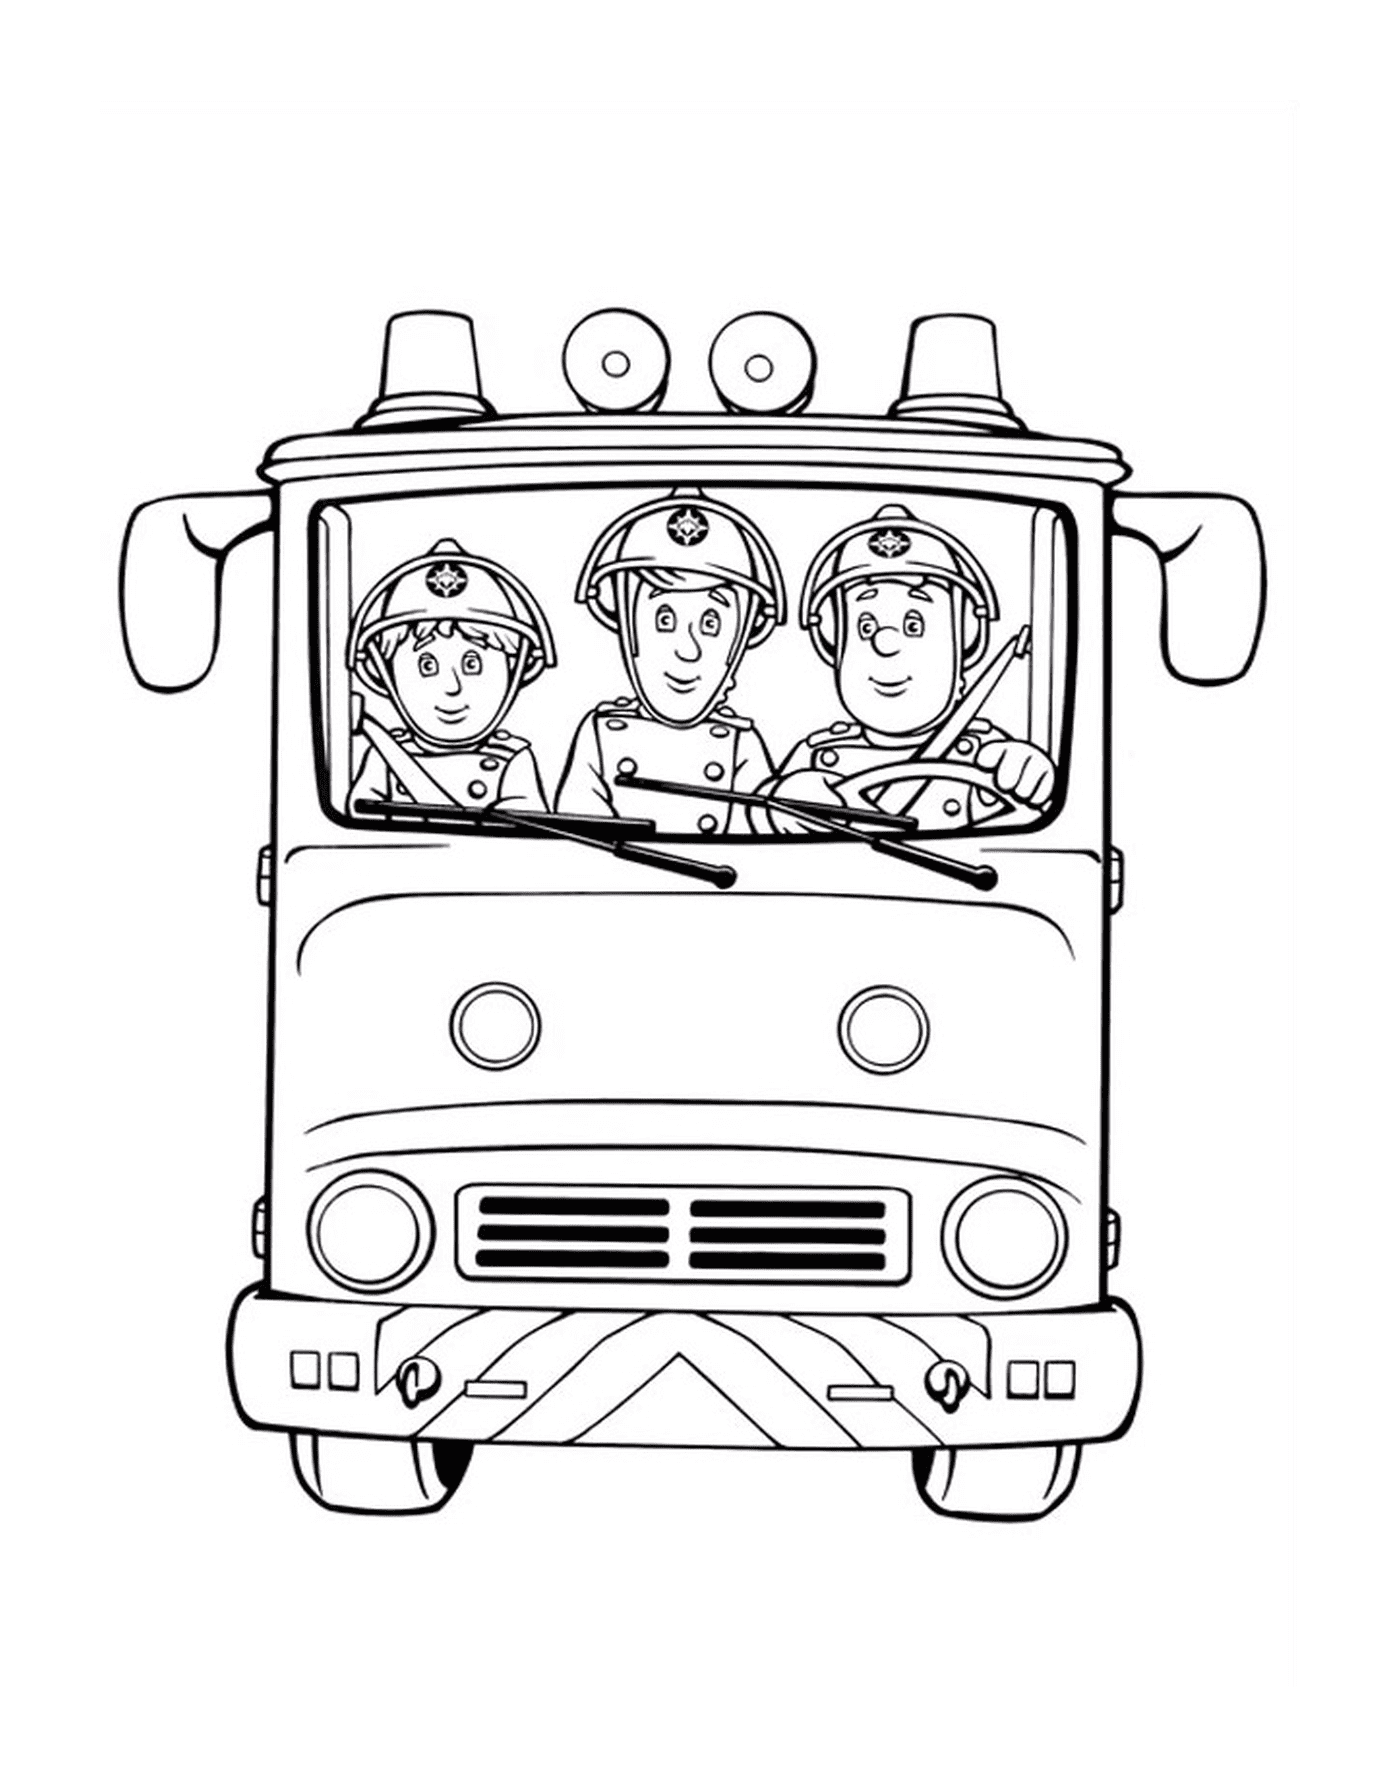  Fire truck with firefighter and comrades 